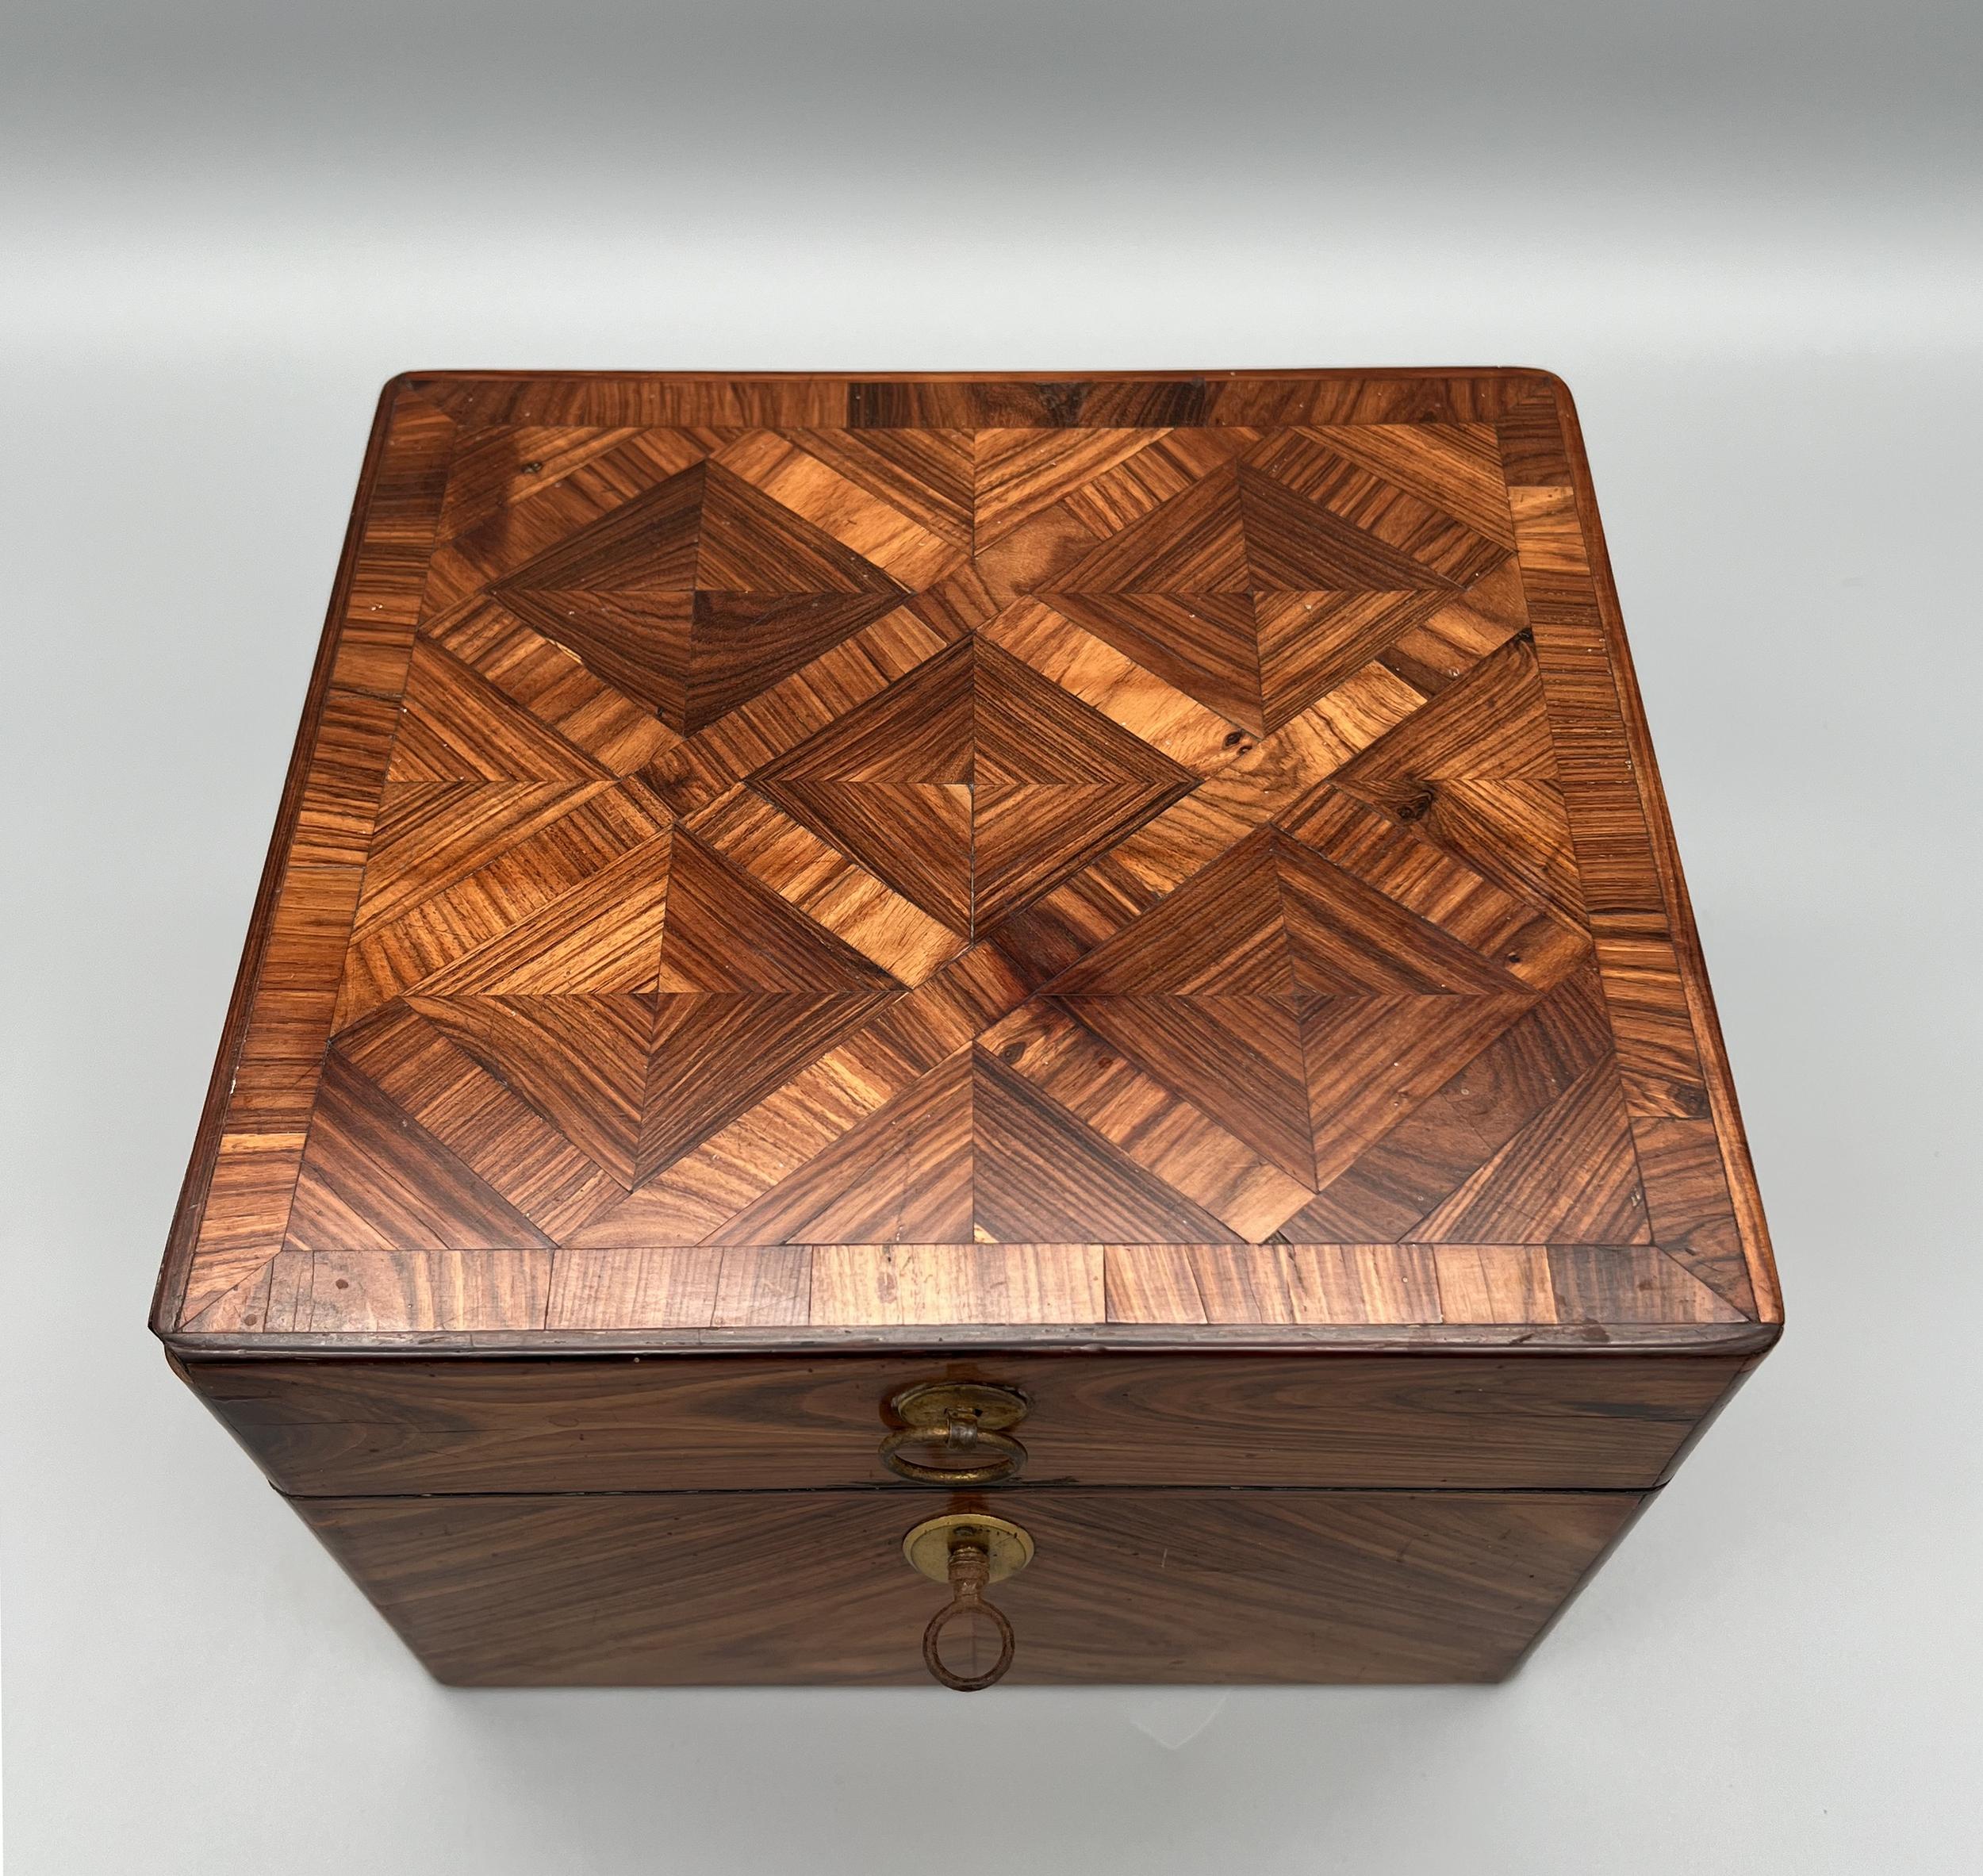 Rare perfume cellar or travel scent box, Berthet manufacturer, rue du Temple 198, Paris, France, 1798 / 1808 in precious wood veneer. The lid is decorated with geometric marquetry, with its key. Velvet interior complete with its six cut-crystal